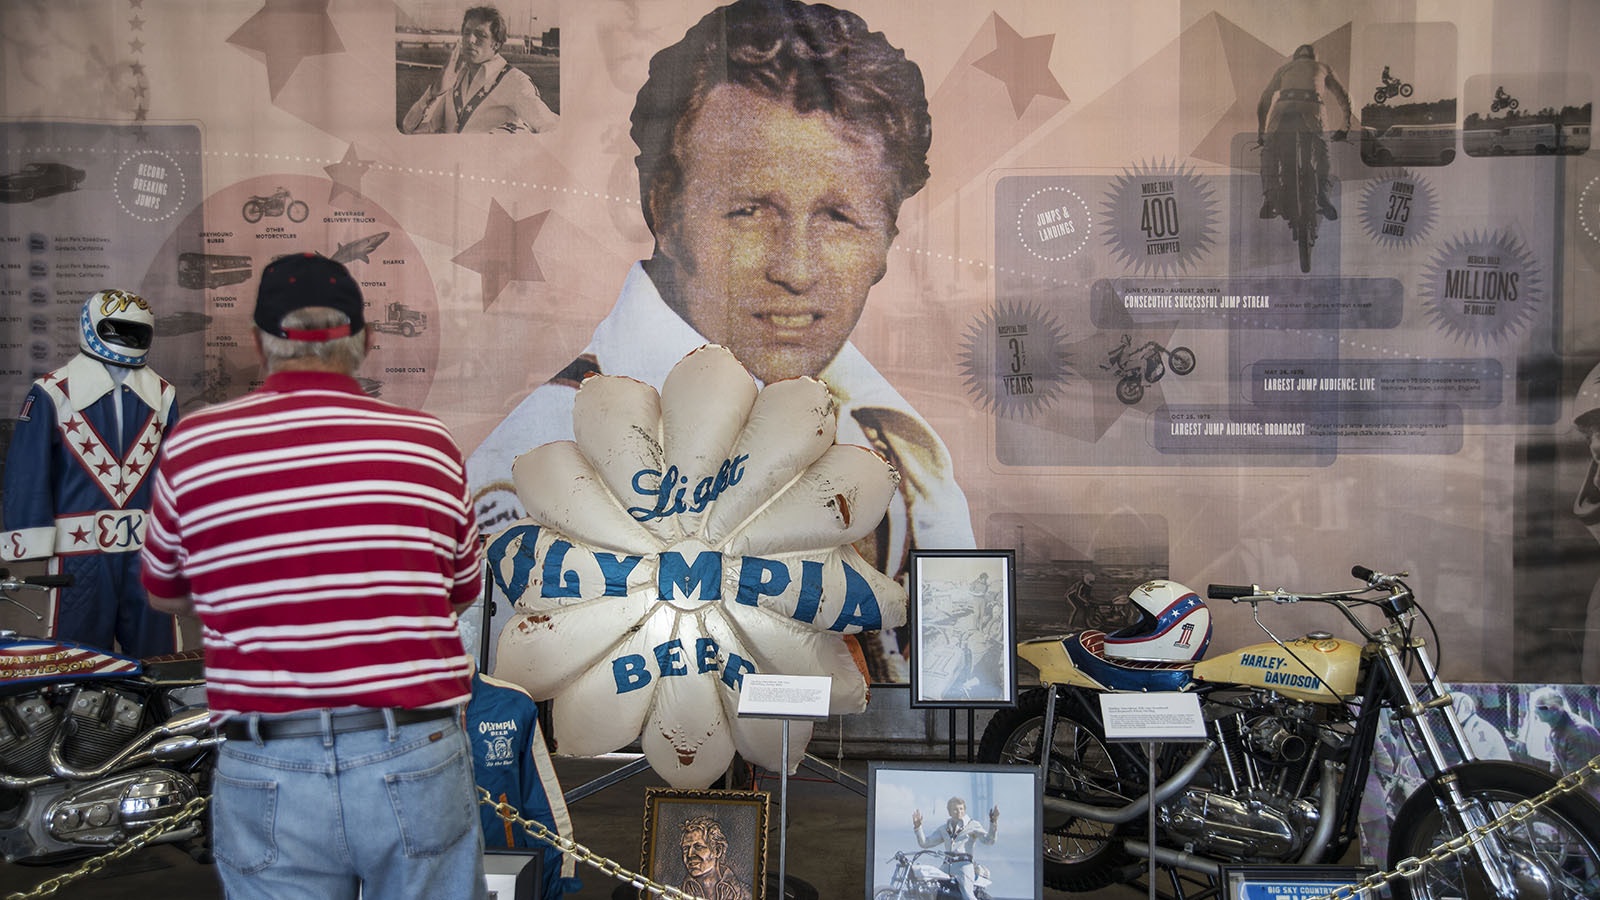 Evel Knievel Days in his hometown of Butte, Montana.